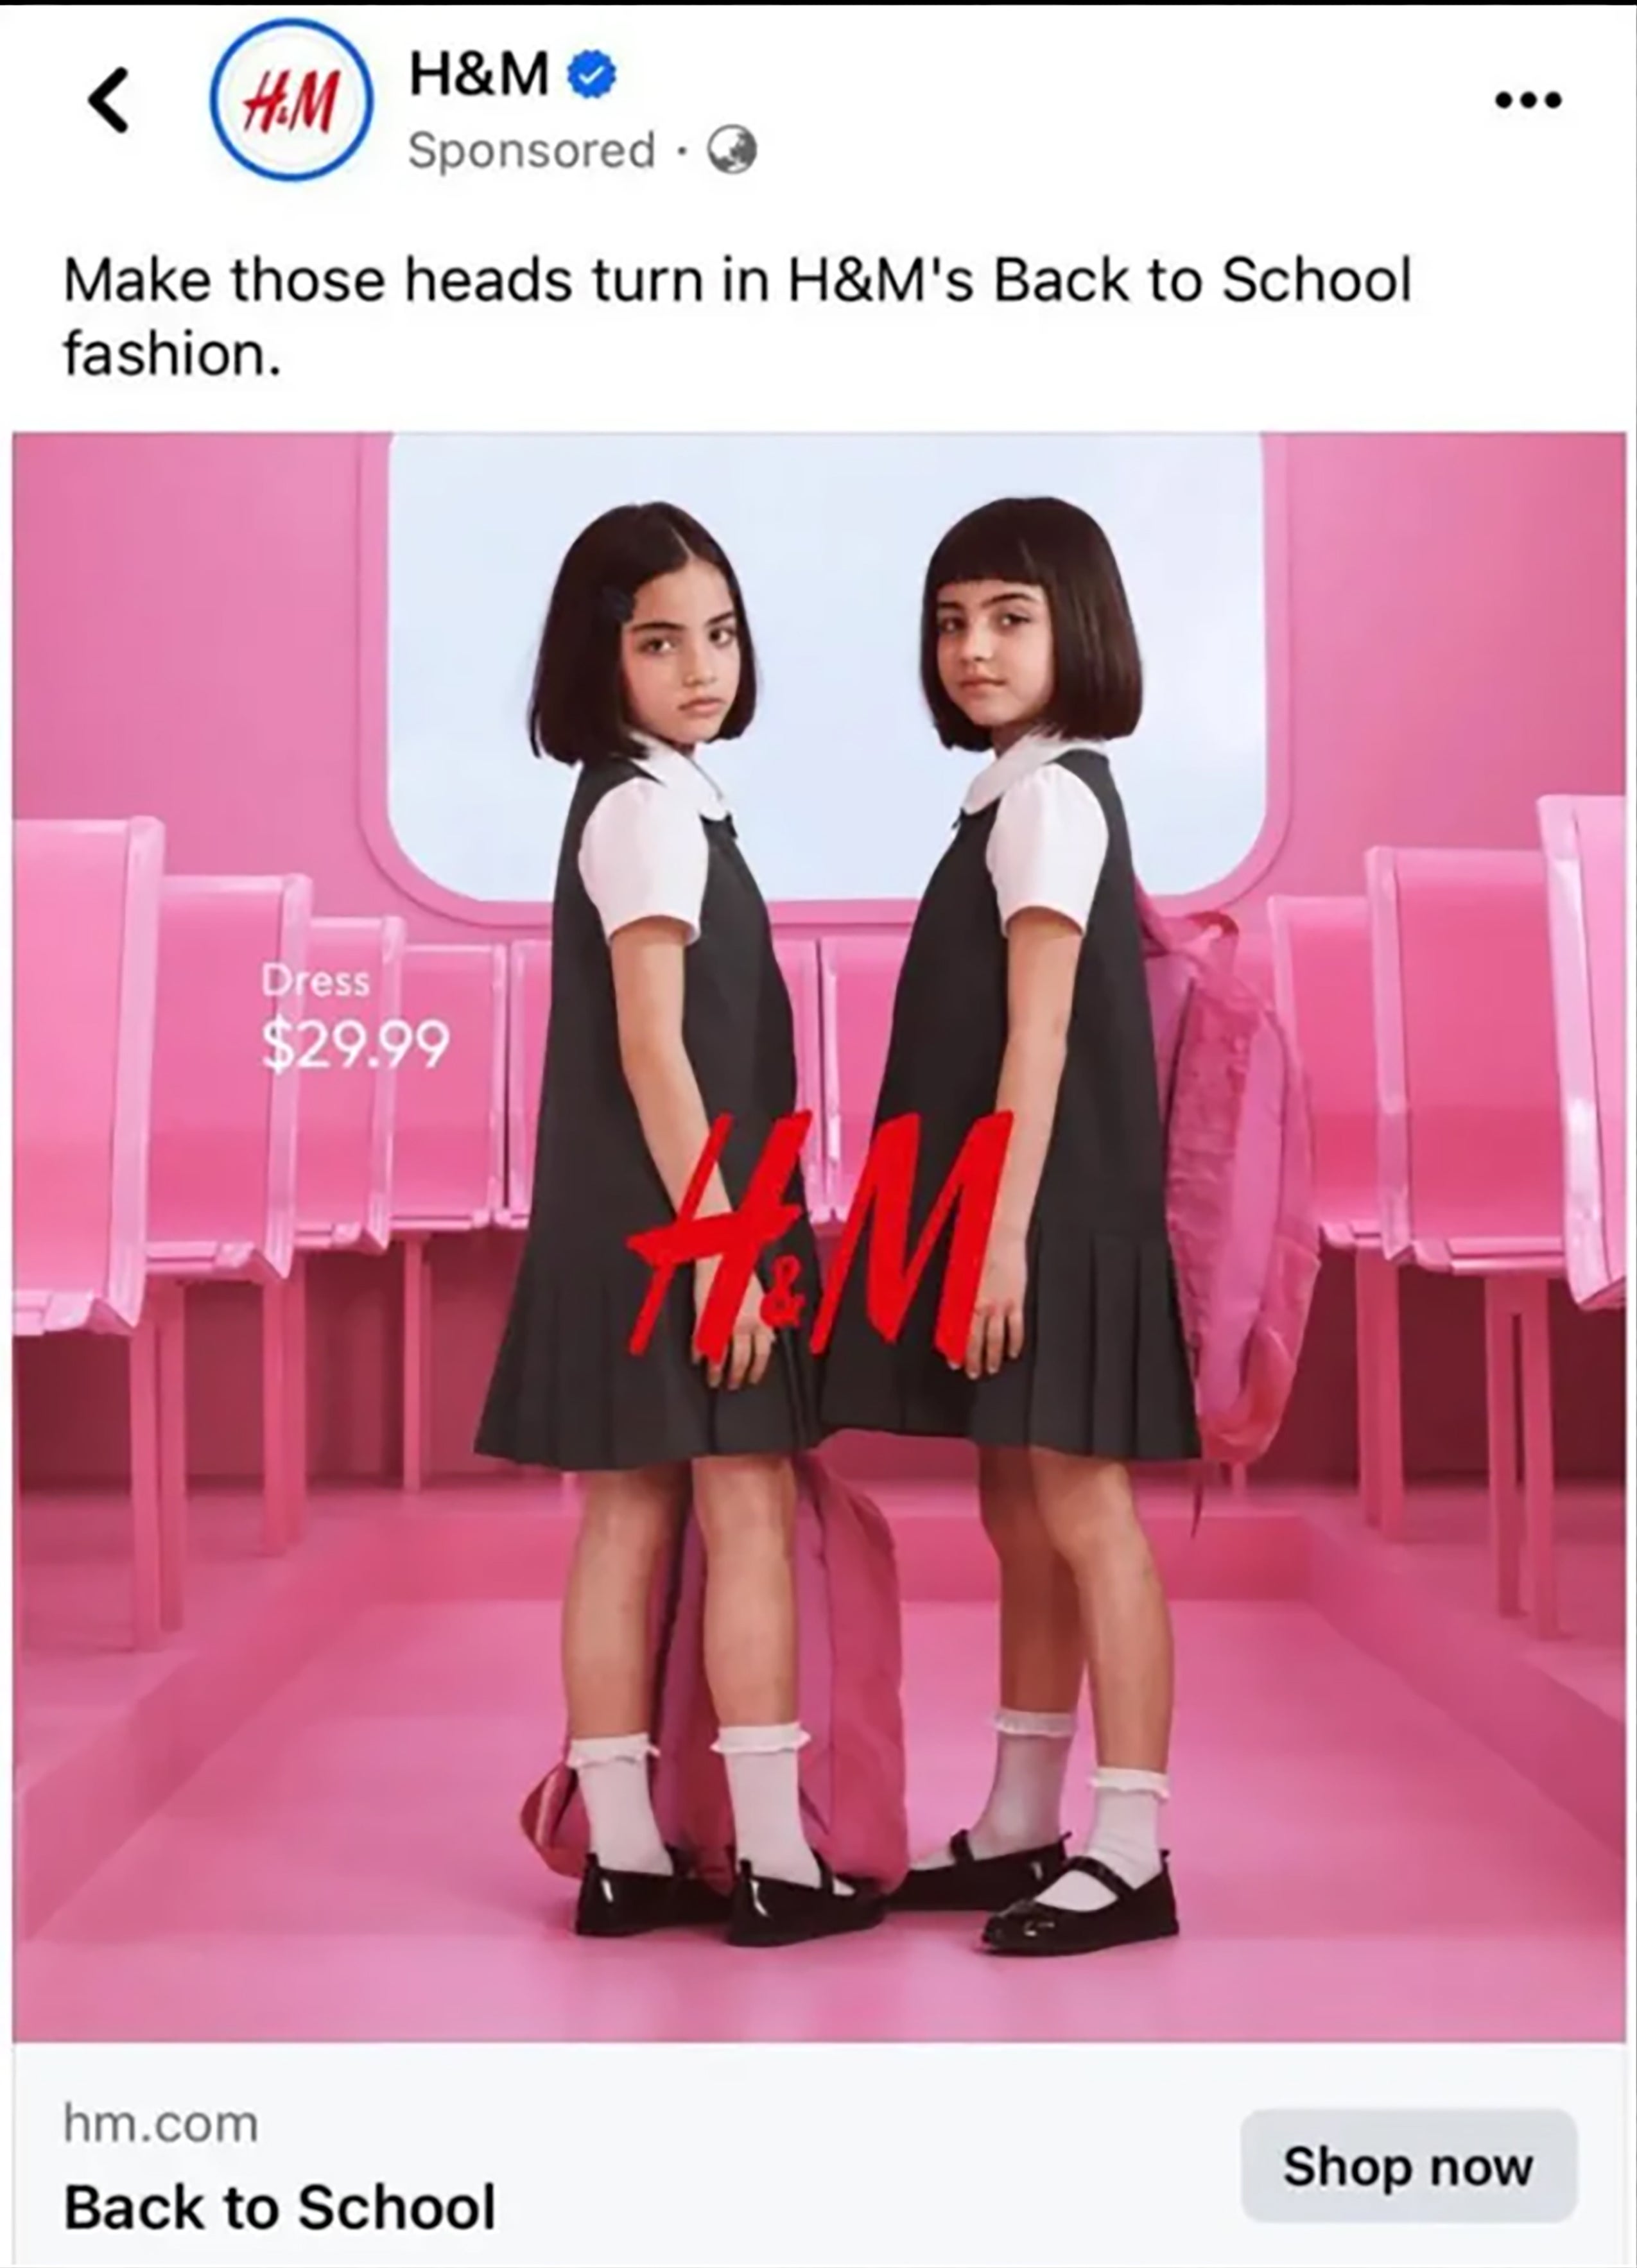 H&M controversy: Why are brands still getting adverts with children wrong?